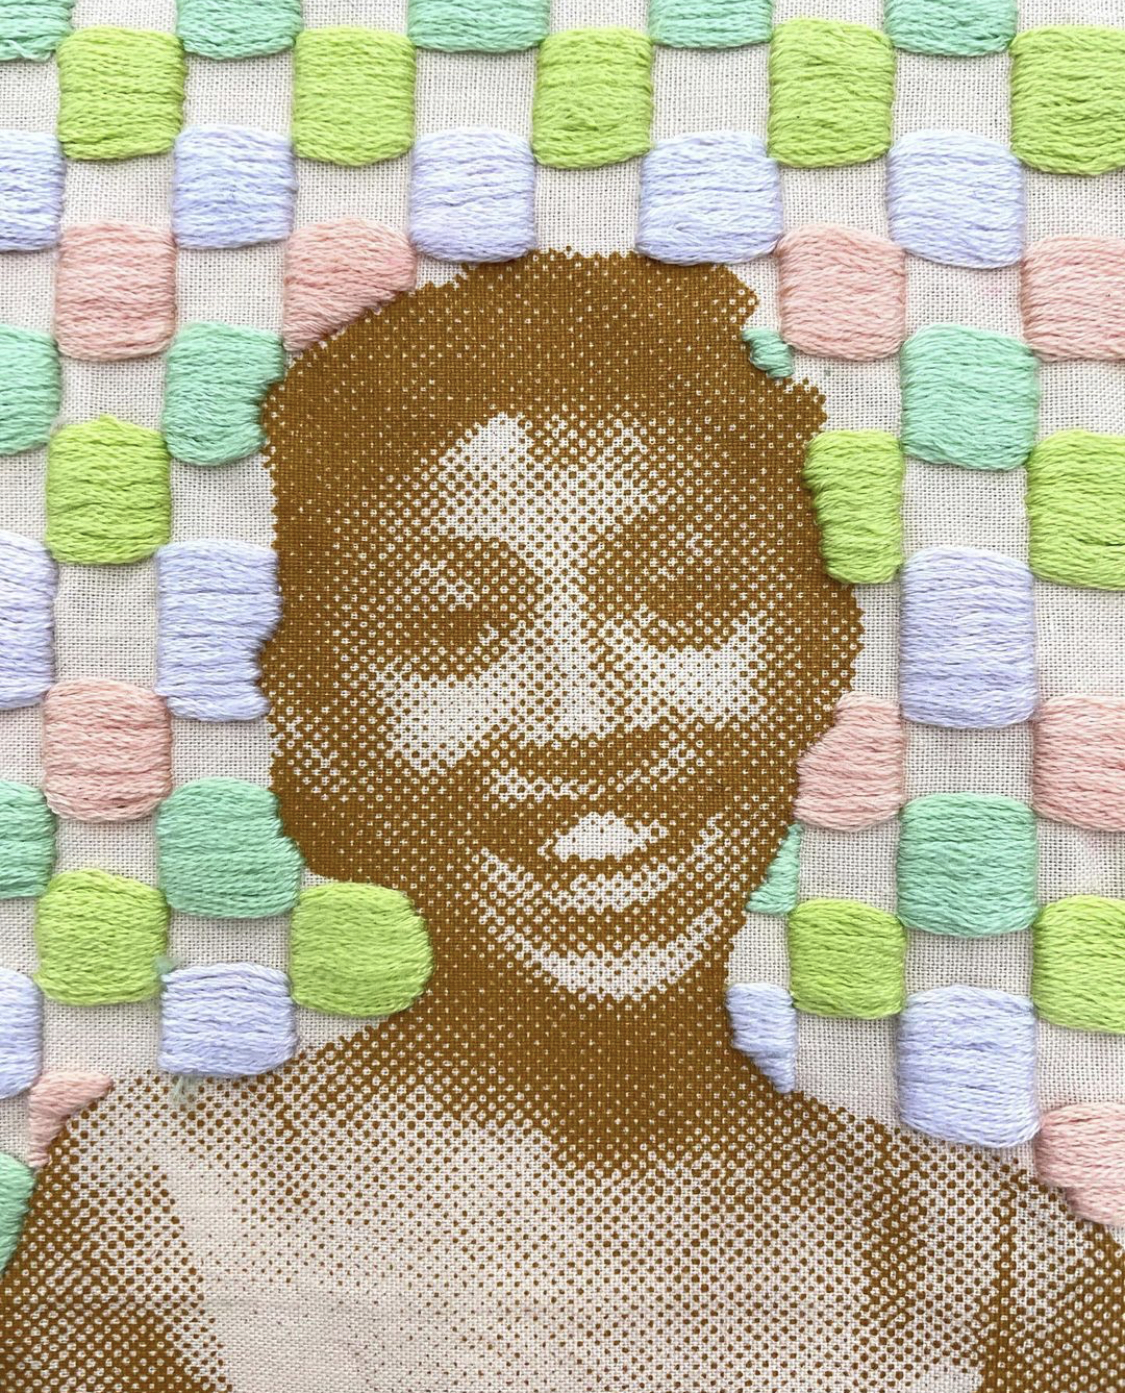 Image of Stephanie Santana's artwork screen-printed on an embroidered background.